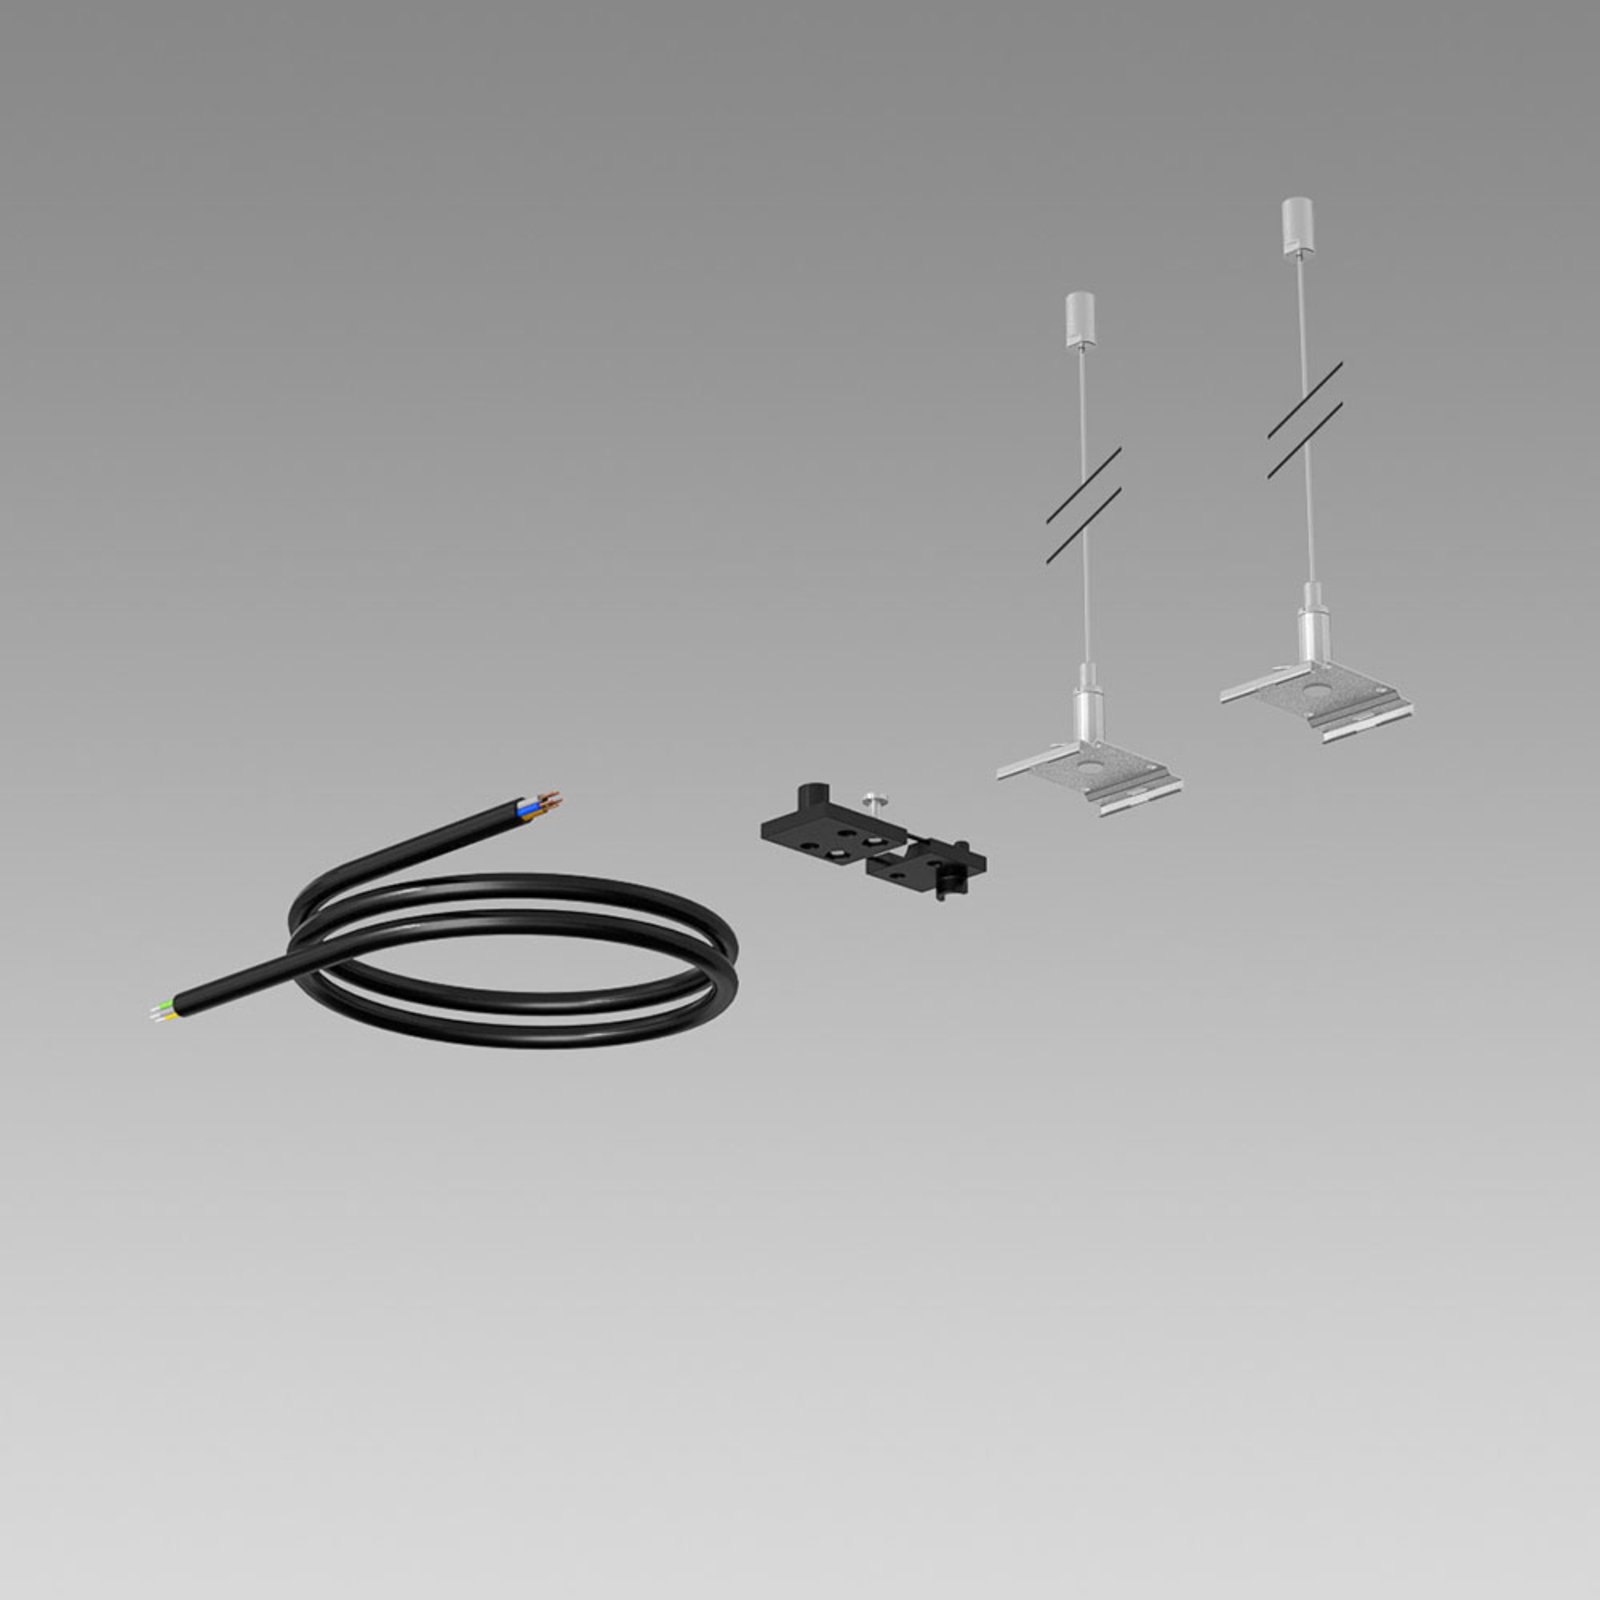 Regent suspension kit with two cables for Purelite